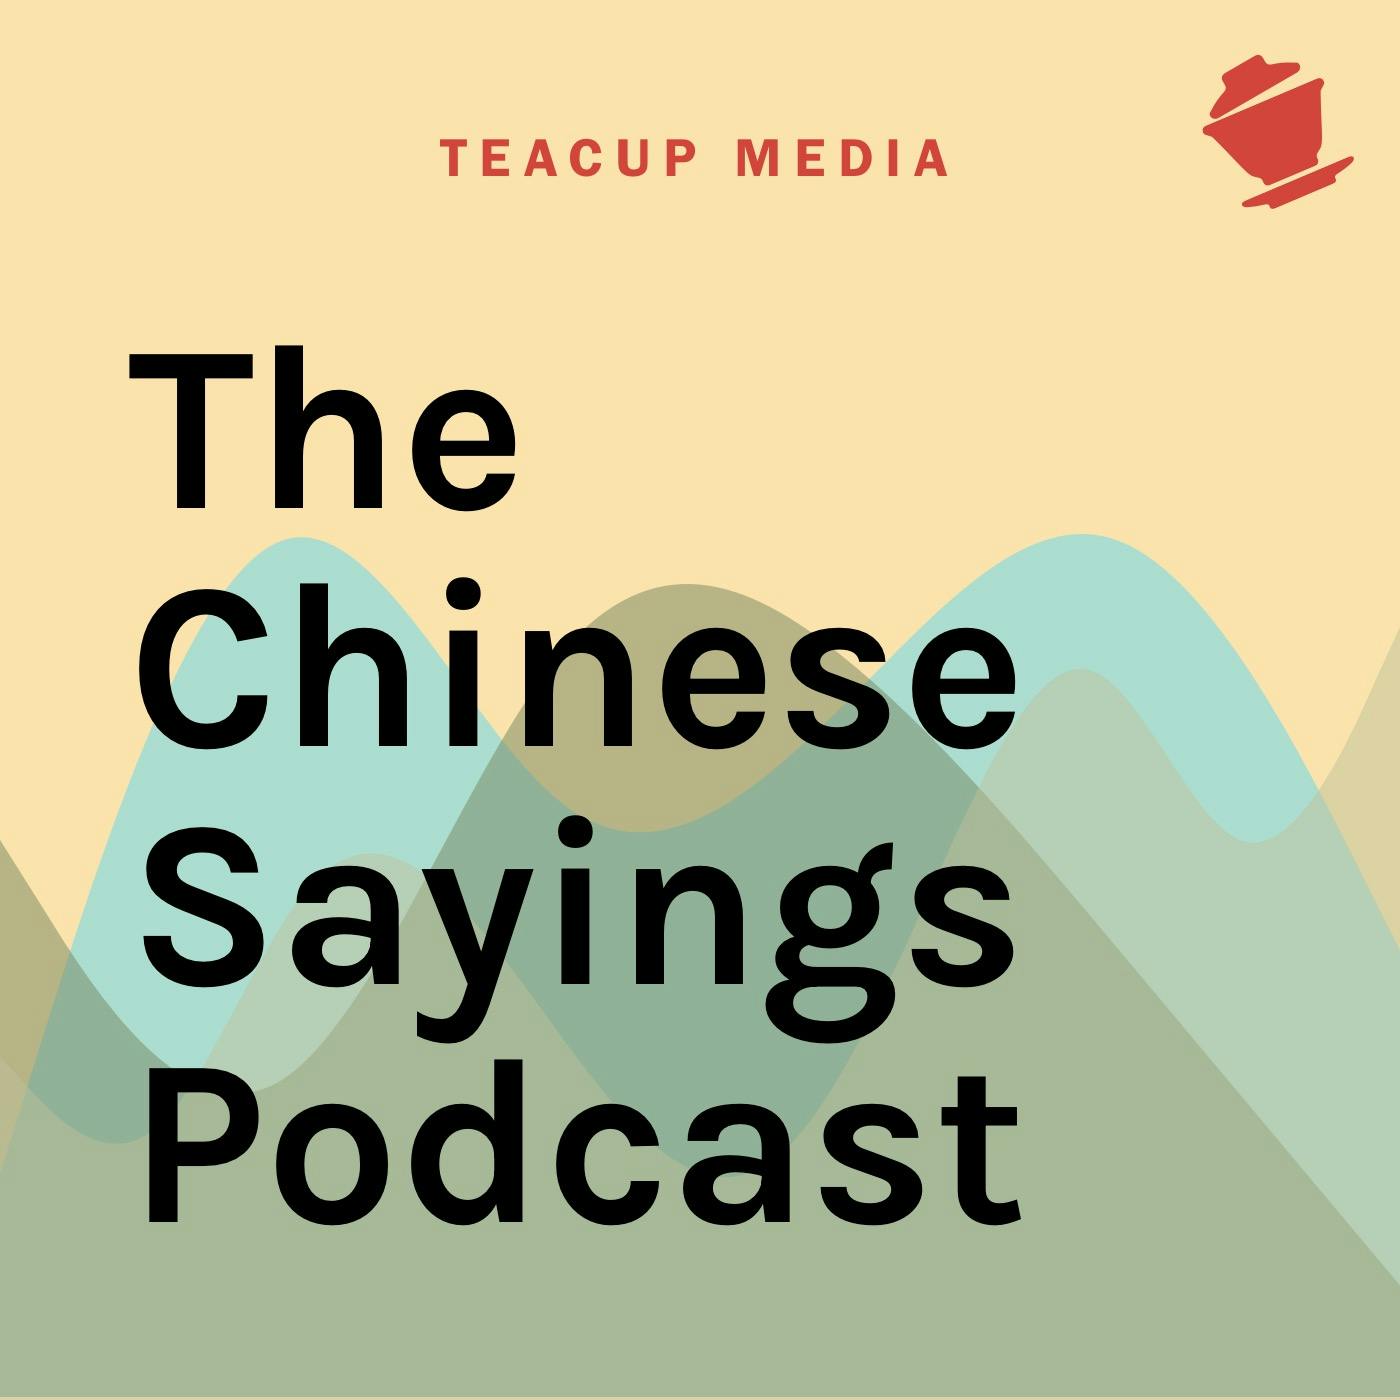 I Want You To Show Me The Way | The Chinese Sayings Podcast